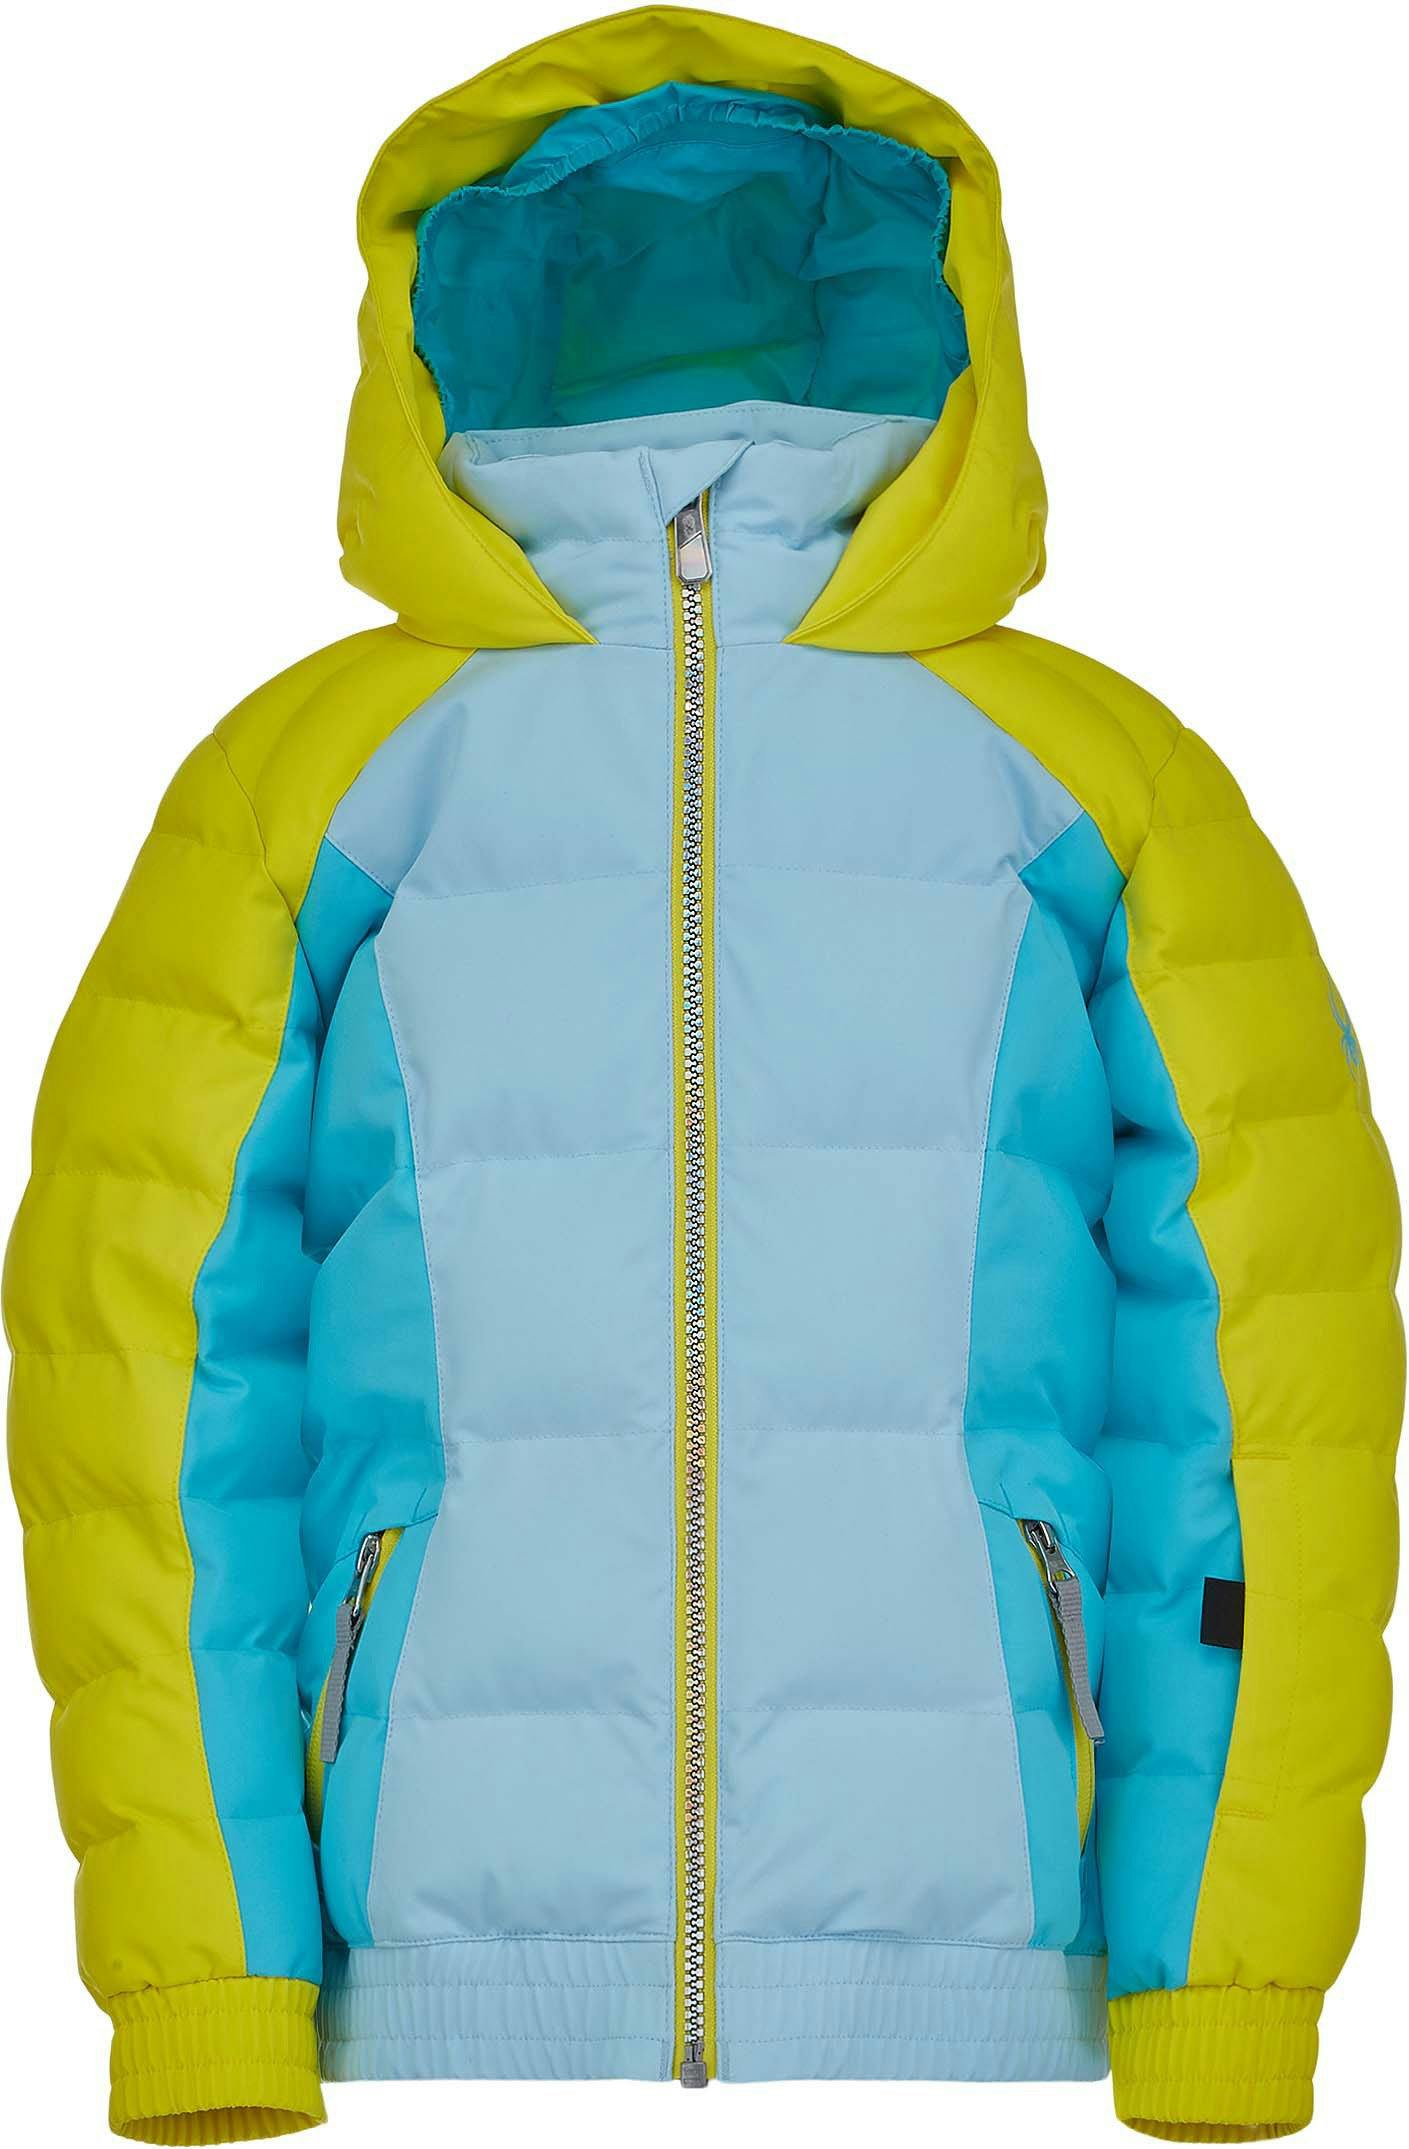 Product image for Bitsy Atlas Synthetic Jacket - Girl